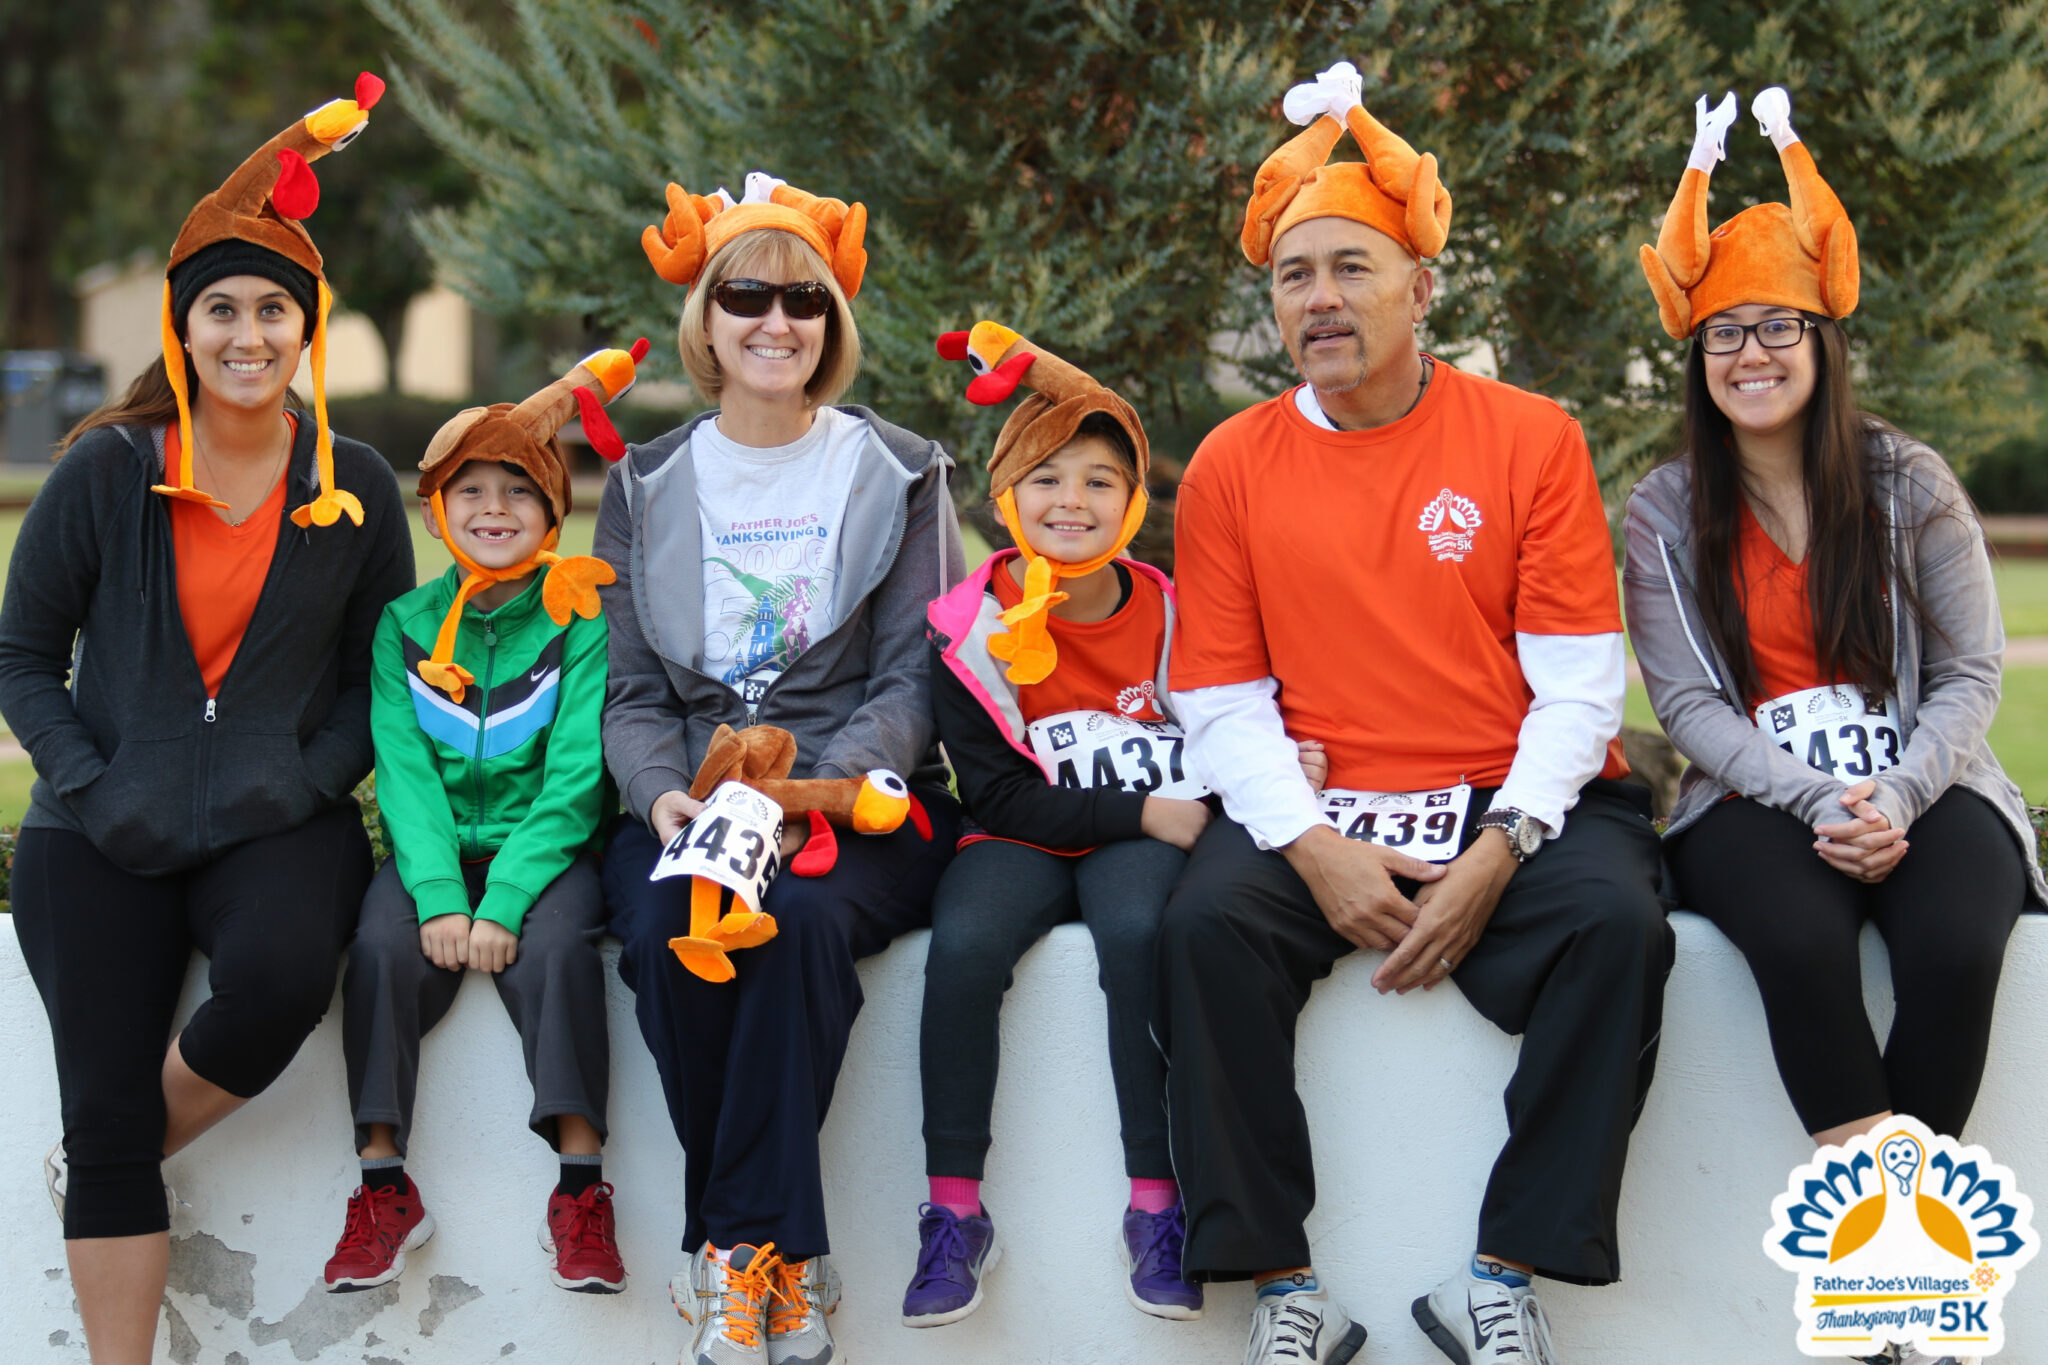 Father Joe’s Villages Announces 16th Annual Thanksgiving Day 5K